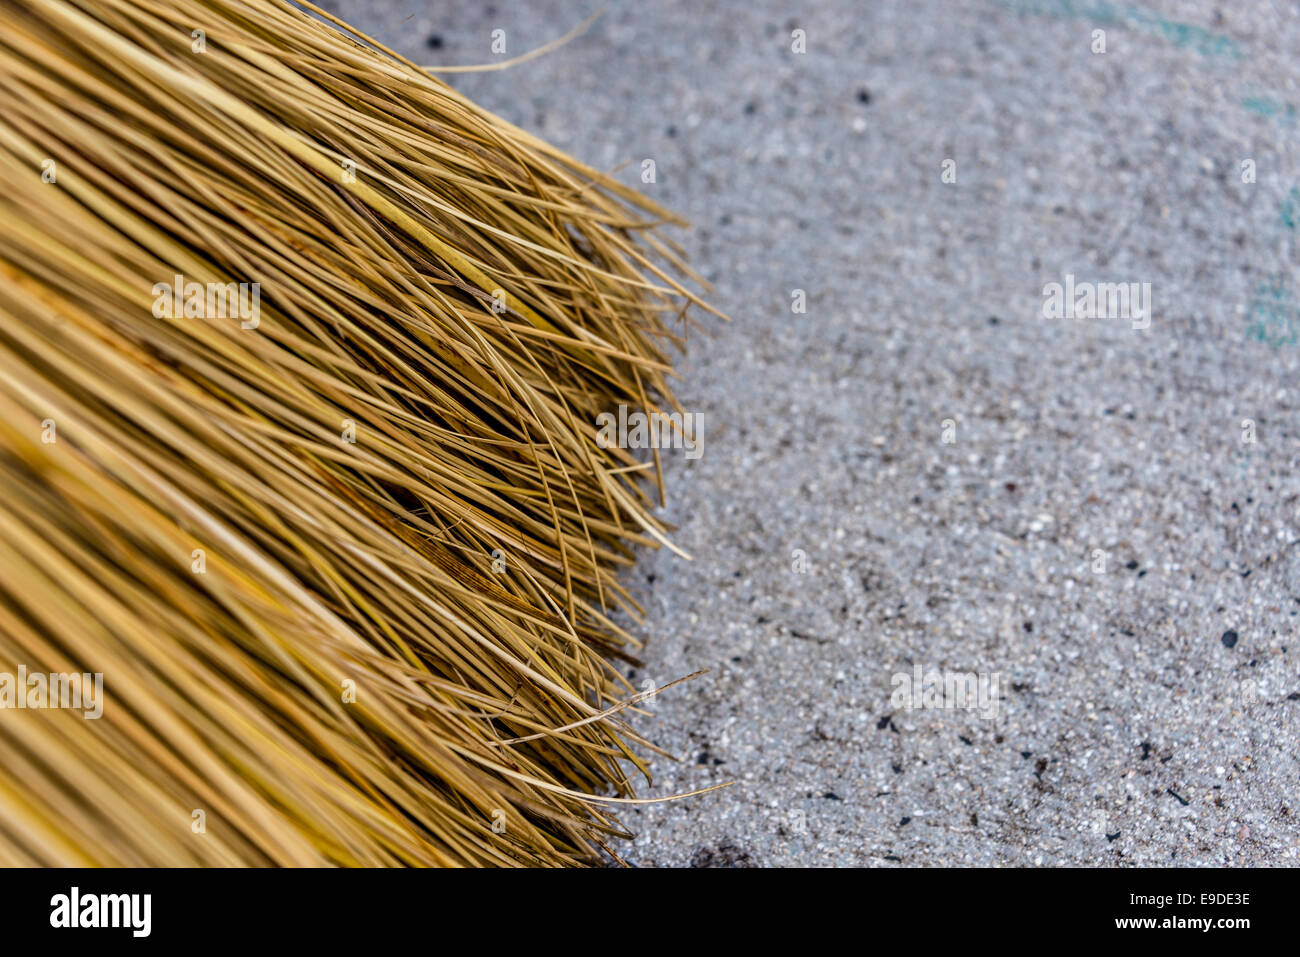 Straw Broom On Ground Closeup Concrete Outdoors Outside Stock Photo